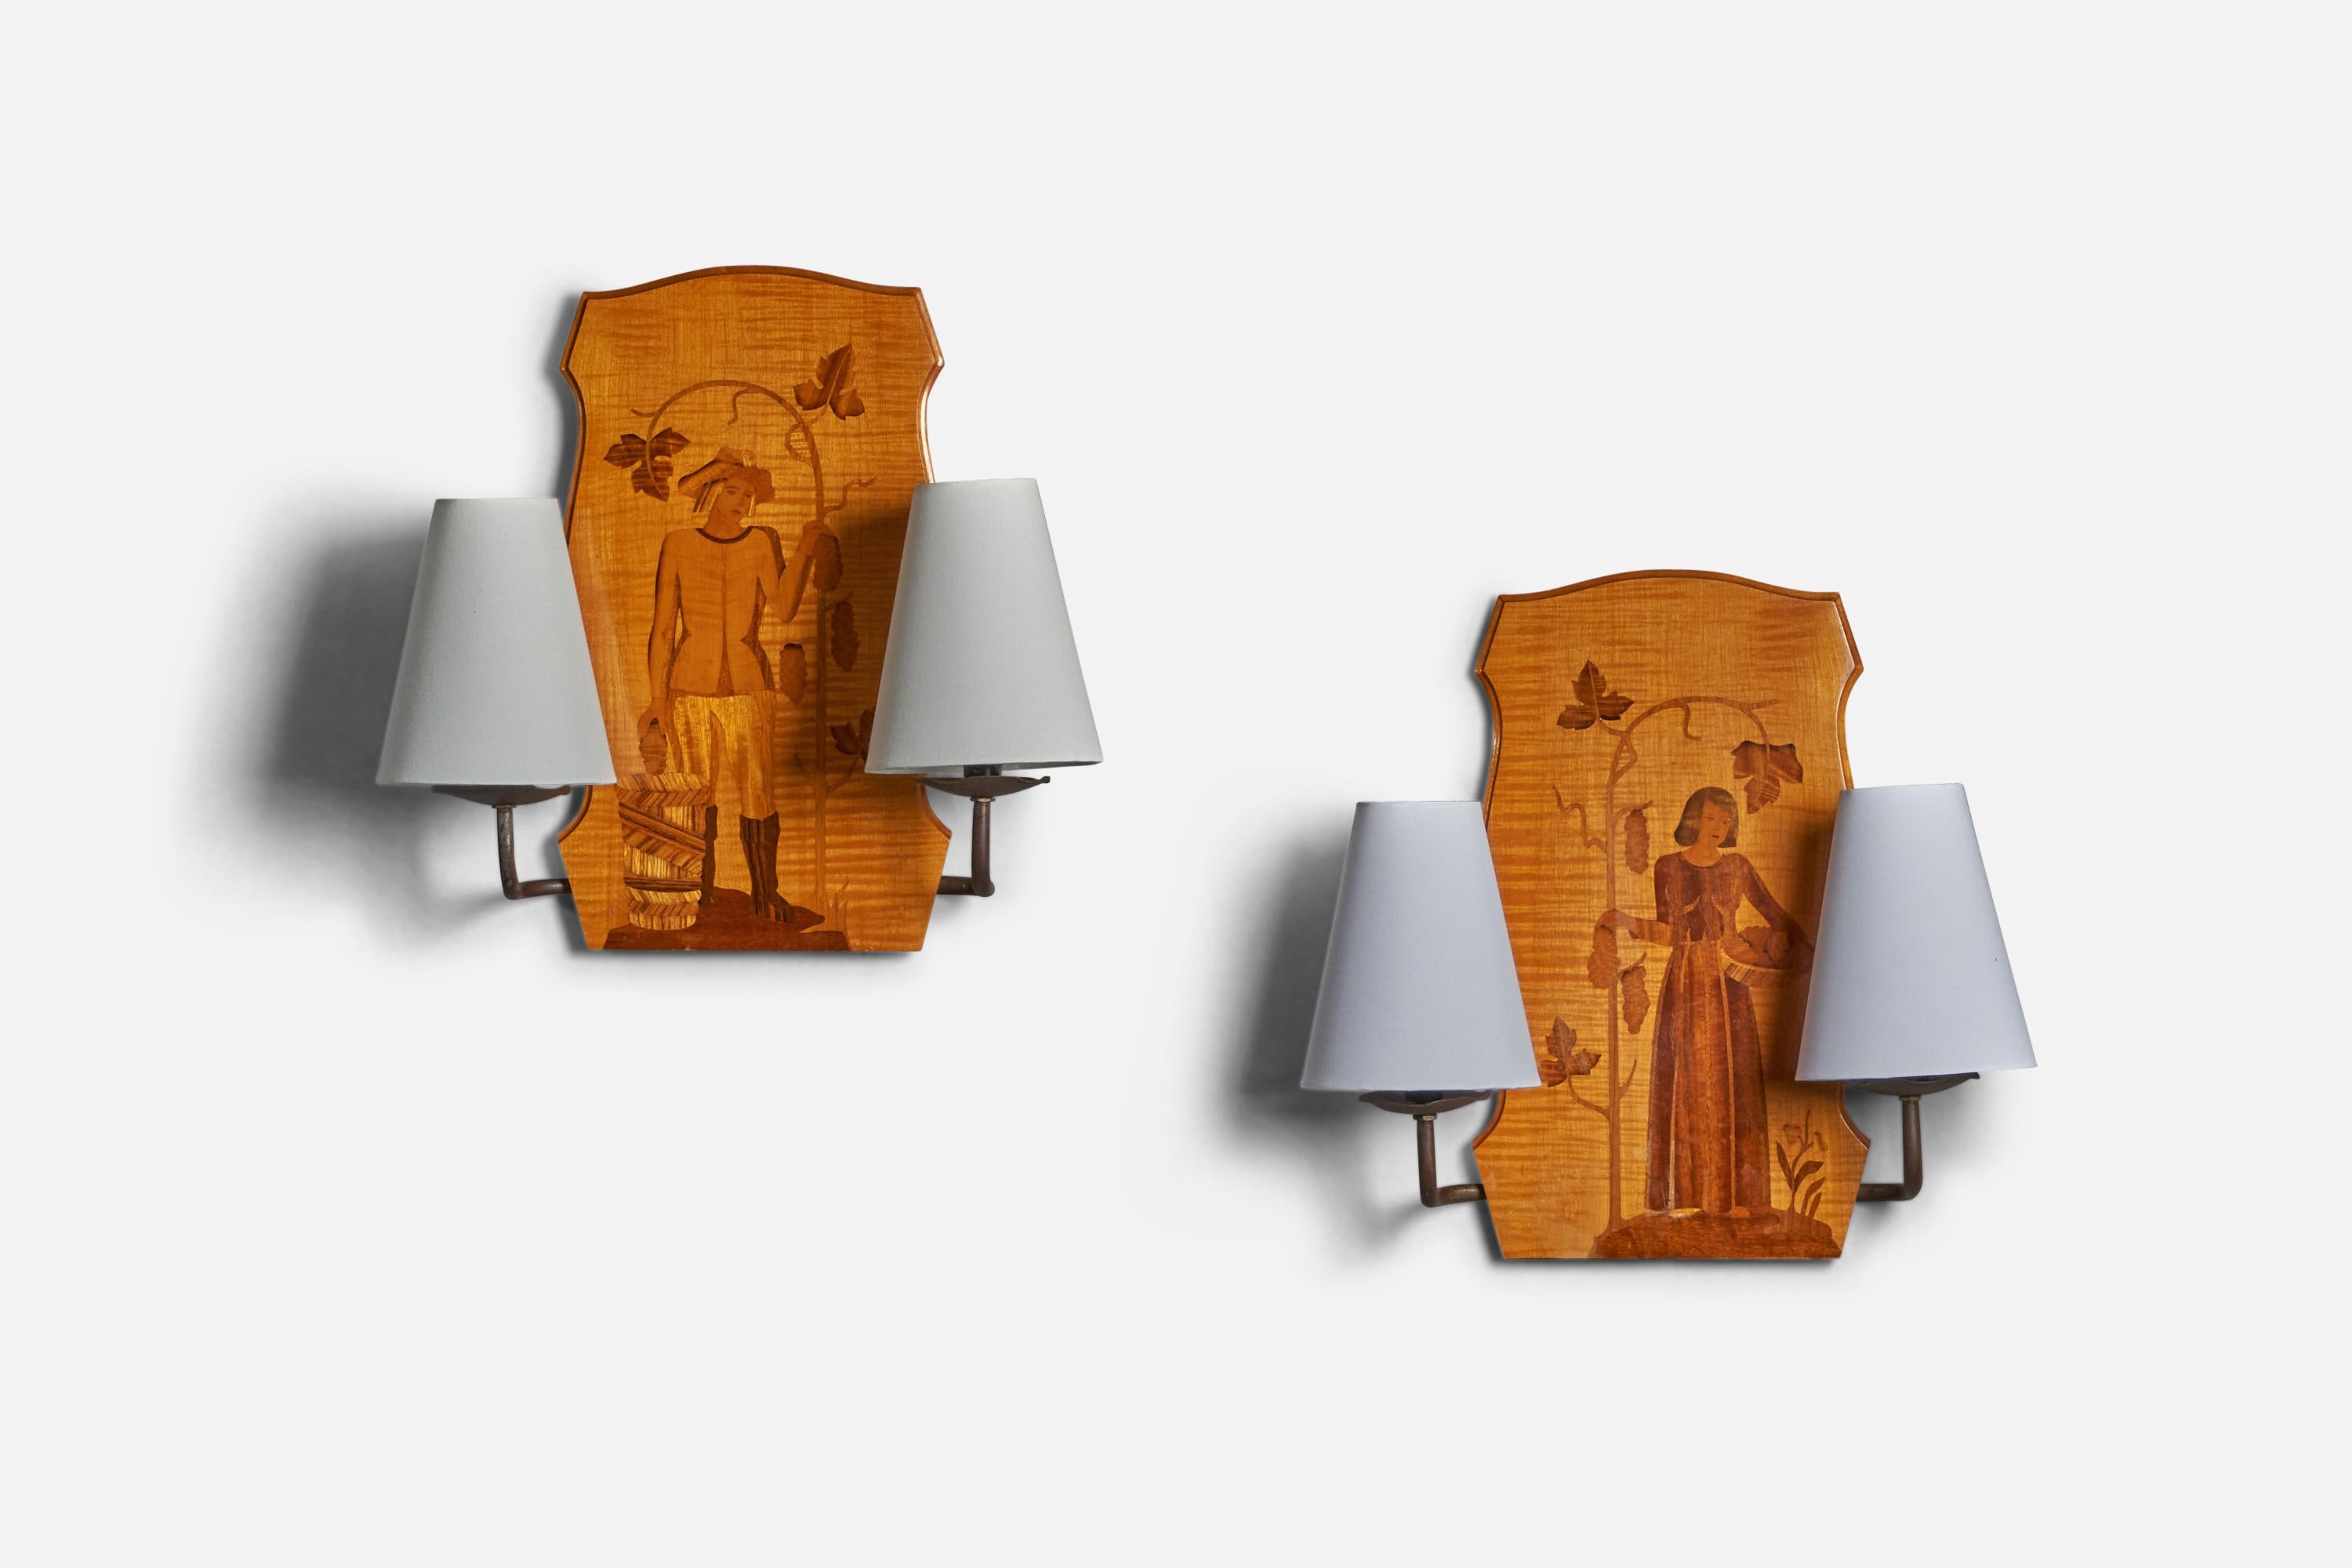 A pair of two-armed marquetry wood, brass and white fabric wall lights design and production attributed to Mjölby Intarsia, Sweden, 1930s.

Overall Dimensions (inches): 16.25” H x 16.5” W x 6.75” D
Back Plate Dimensions (inches): 16.25” H x 9.5”